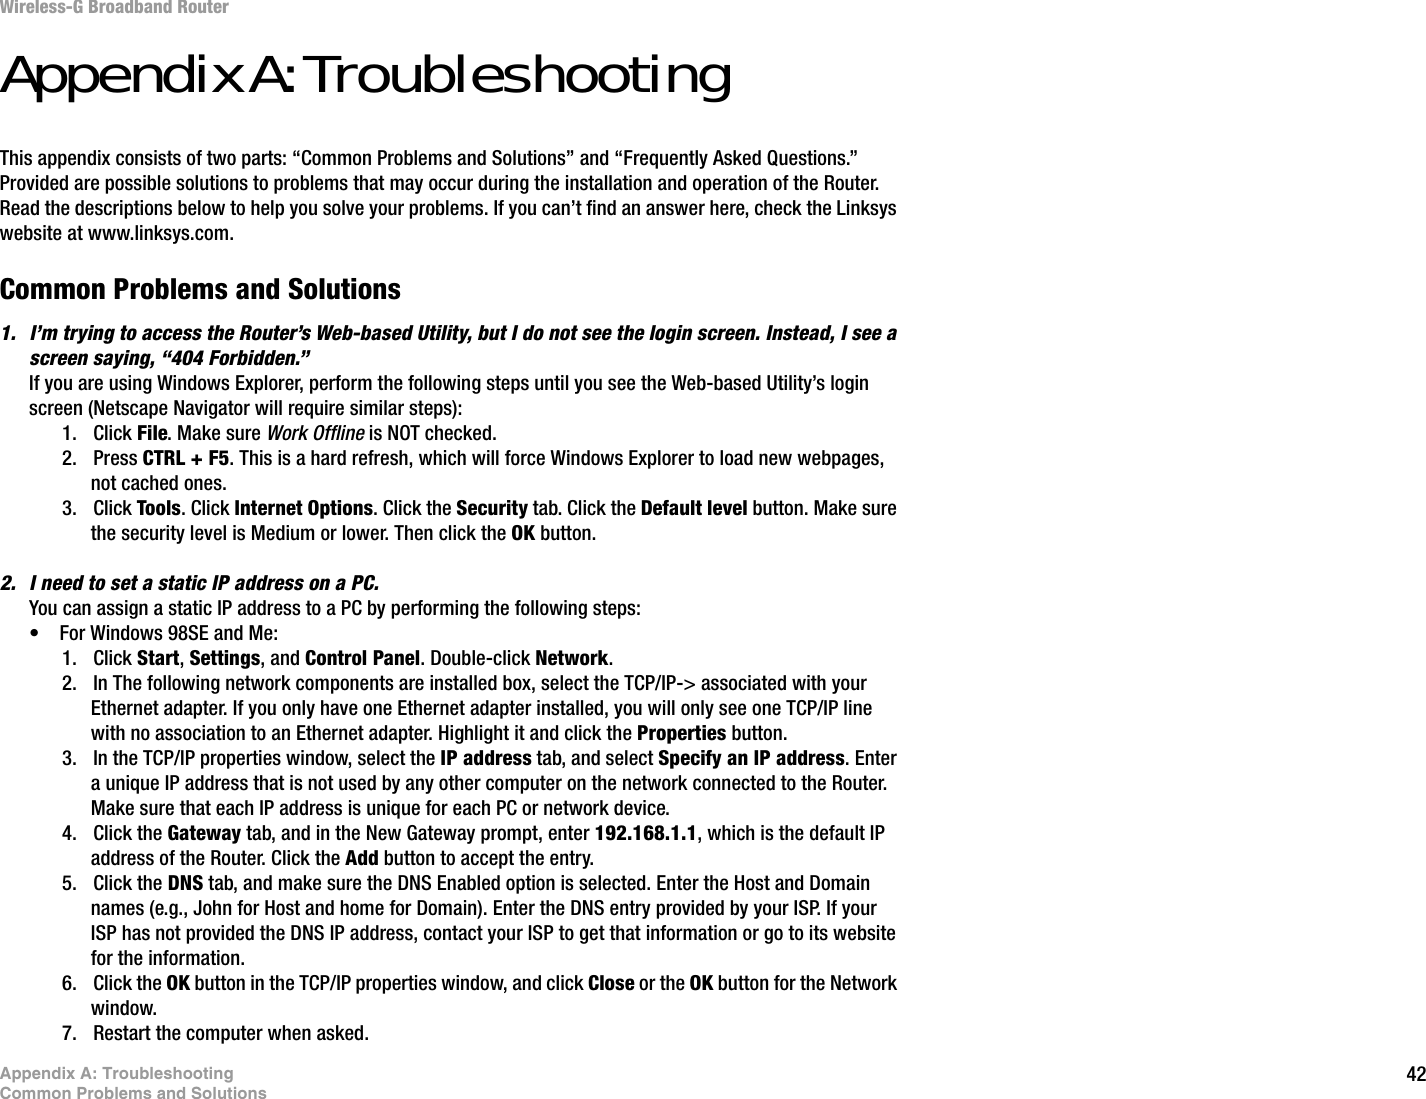 42Appendix A: TroubleshootingCommon Problems and SolutionsWireless-G Broadband RouterAppendix A: TroubleshootingThis appendix consists of two parts: “Common Problems and Solutions” and “Frequently Asked Questions.” Provided are possible solutions to problems that may occur during the installation and operation of the Router. Read the descriptions below to help you solve your problems. If you can’t find an answer here, check the Linksys website at www.linksys.com.Common Problems and Solutions1. I’m trying to access the Router’s Web-based Utility, but I do not see the login screen. Instead, I see a screen saying, “404 Forbidden.”If you are using Windows Explorer, perform the following steps until you see the Web-based Utility’s login screen (Netscape Navigator will require similar steps):1. Click File. Make sure Work Offline is NOT checked.2. Press CTRL + F5. This is a hard refresh, which will force Windows Explorer to load new webpages, not cached ones.3. Click Tools. Click Internet Options. Click the Security tab. Click the Default level button. Make sure the security level is Medium or lower. Then click the OK button.2. I need to set a static IP address on a PC.You can assign a static IP address to a PC by performing the following steps:• For Windows 98SE and Me:1. Click Start,Settings, and Control Panel. Double-click Network.2. In The following network components are installed box, select the TCP/IP-&gt; associated with your Ethernet adapter. If you only have one Ethernet adapter installed, you will only see one TCP/IP line with no association to an Ethernet adapter. Highlight it and click the Properties button.3. In the TCP/IP properties window, select the IP address tab, and select Specify an IP address. Enter a unique IP address that is not used by any other computer on the network connected to the Router. Make sure that each IP address is unique for each PC or network device.4. Click the Gateway tab, and in the New Gateway prompt, enter 192.168.1.1, which is the default IP address of the Router. Click the Add button to accept the entry.5. Click the DNS tab, and make sure the DNS Enabled option is selected. Enter the Host and Domain names (e.g., John for Host and home for Domain). Enter the DNS entry provided by your ISP. If your ISP has not provided the DNS IP address, contact your ISP to get that information or go to its website for the information.6. Click the OK button in the TCP/IP properties window, and click Close or the OK button for the Network window.7. Restart the computer when asked.